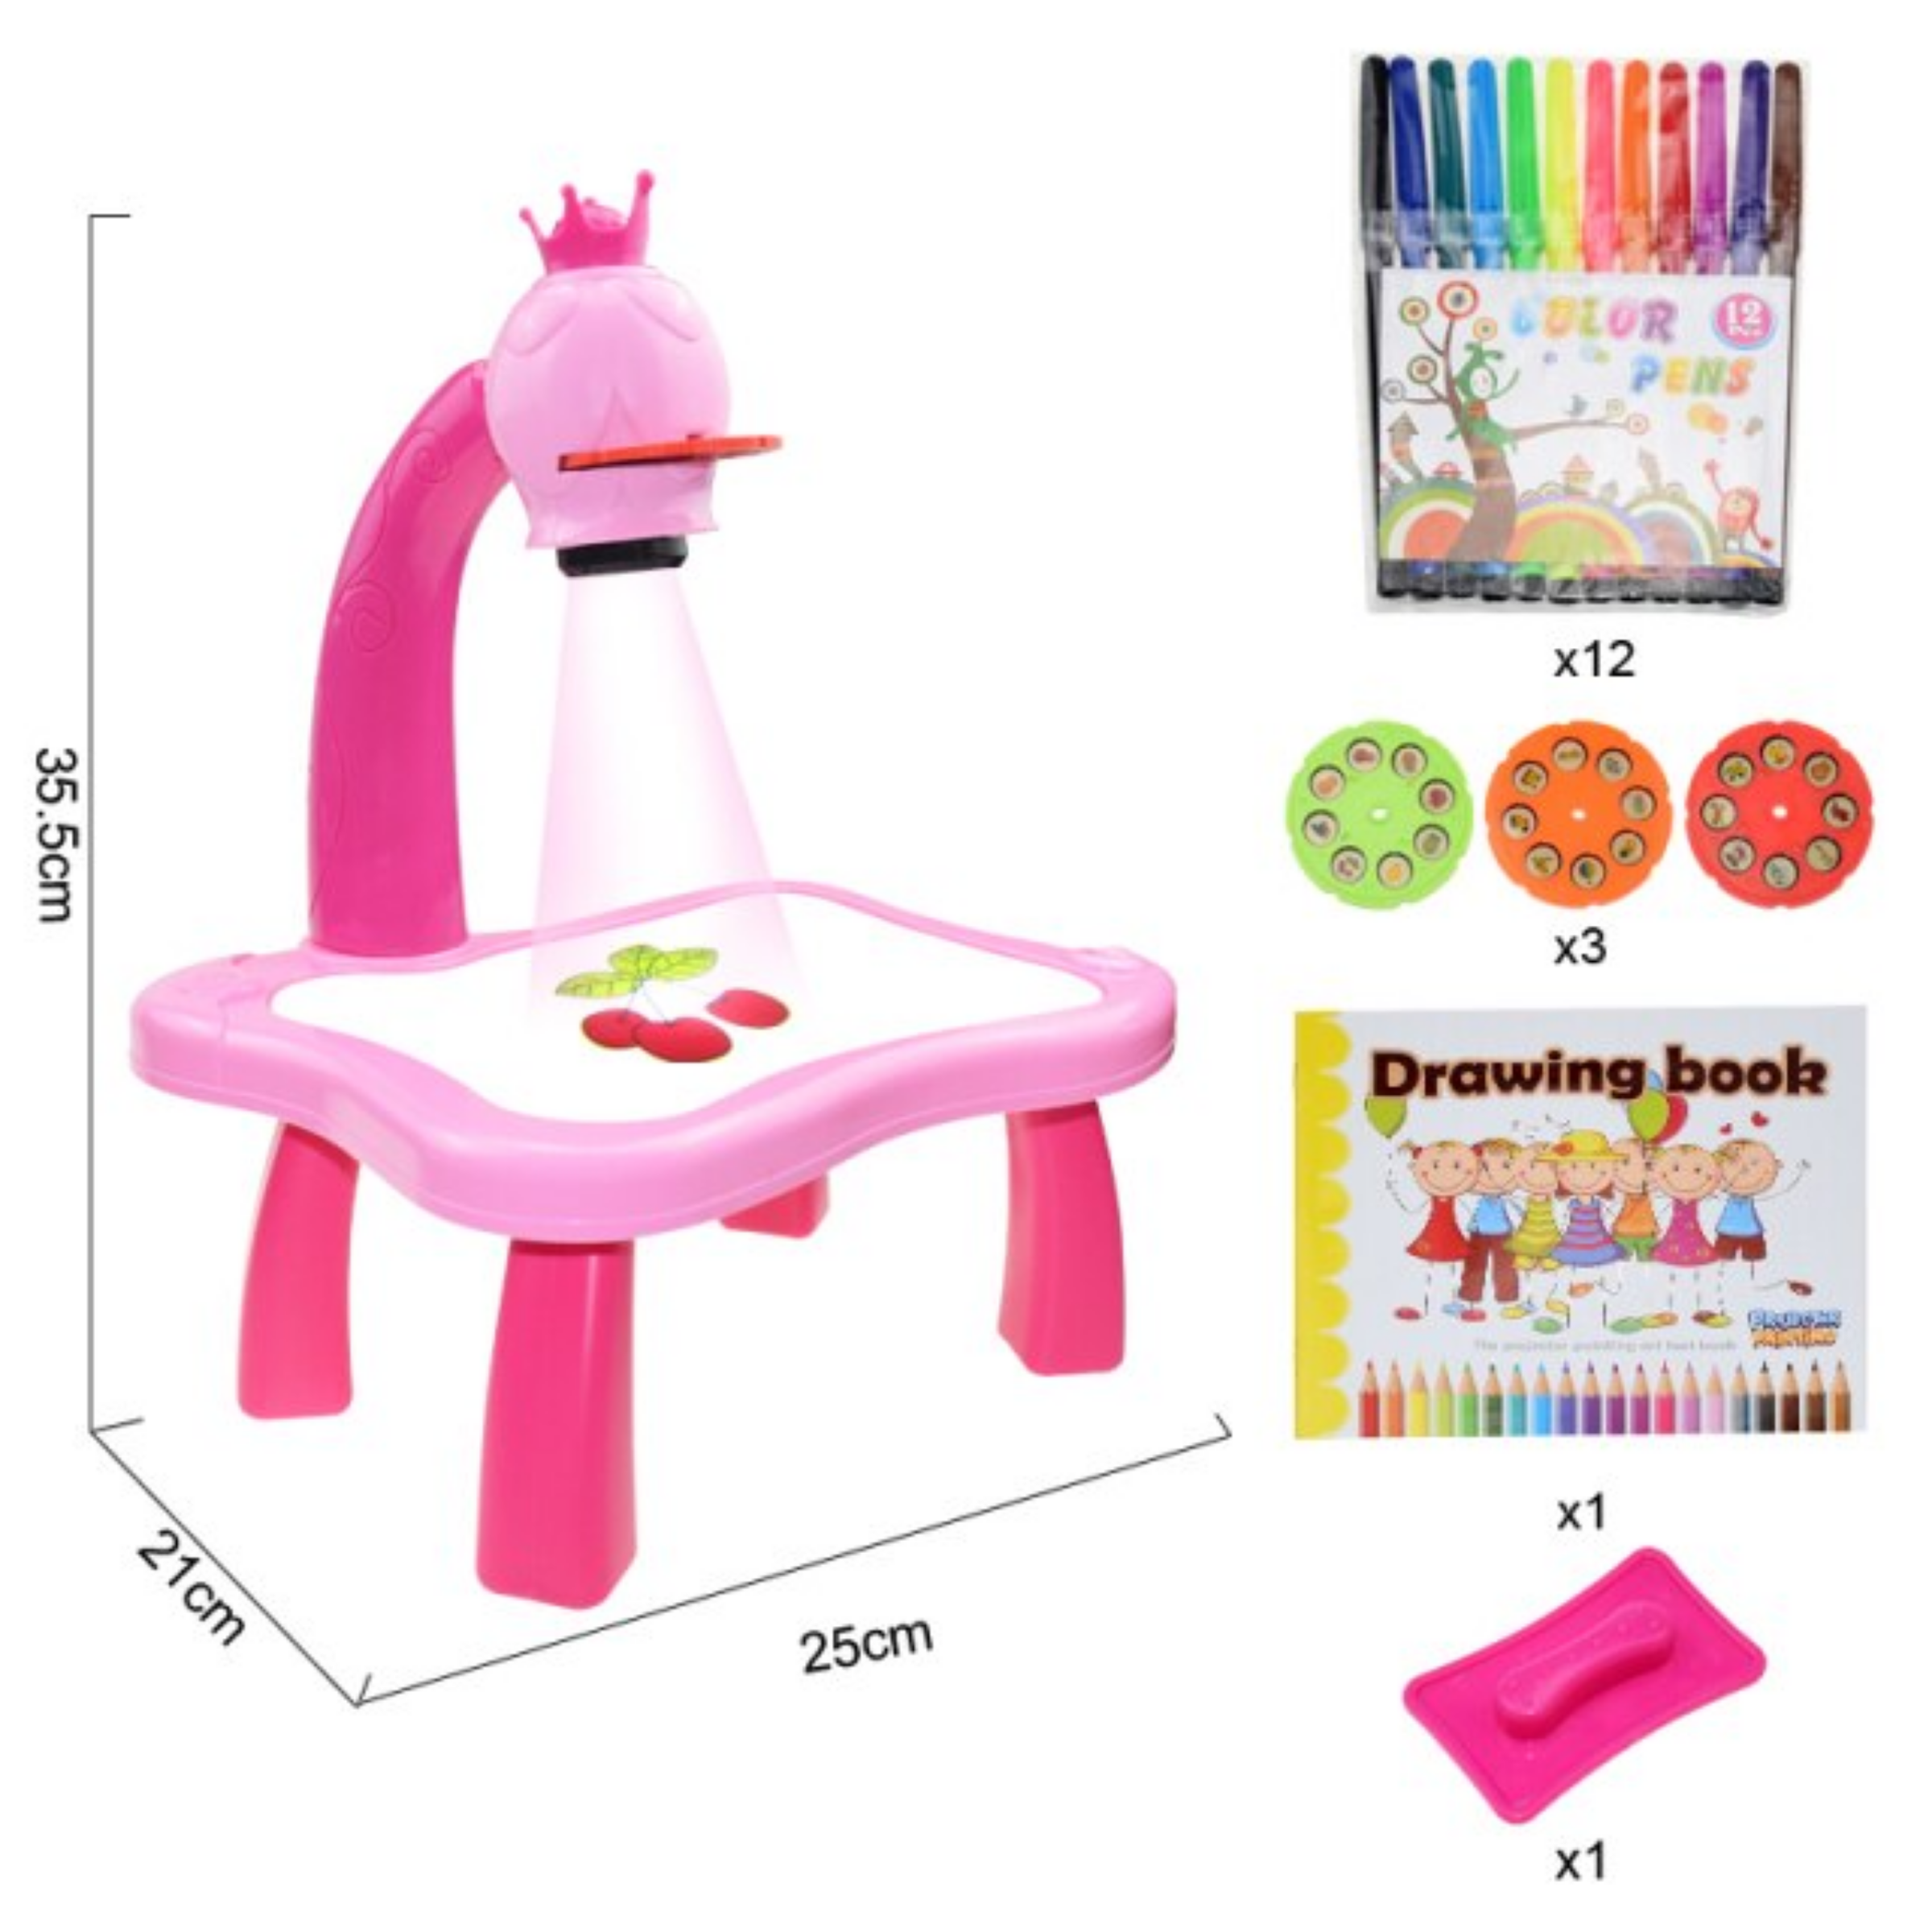 Best gifts for Christmas children Children LED Art Drawing Projector Painting Table